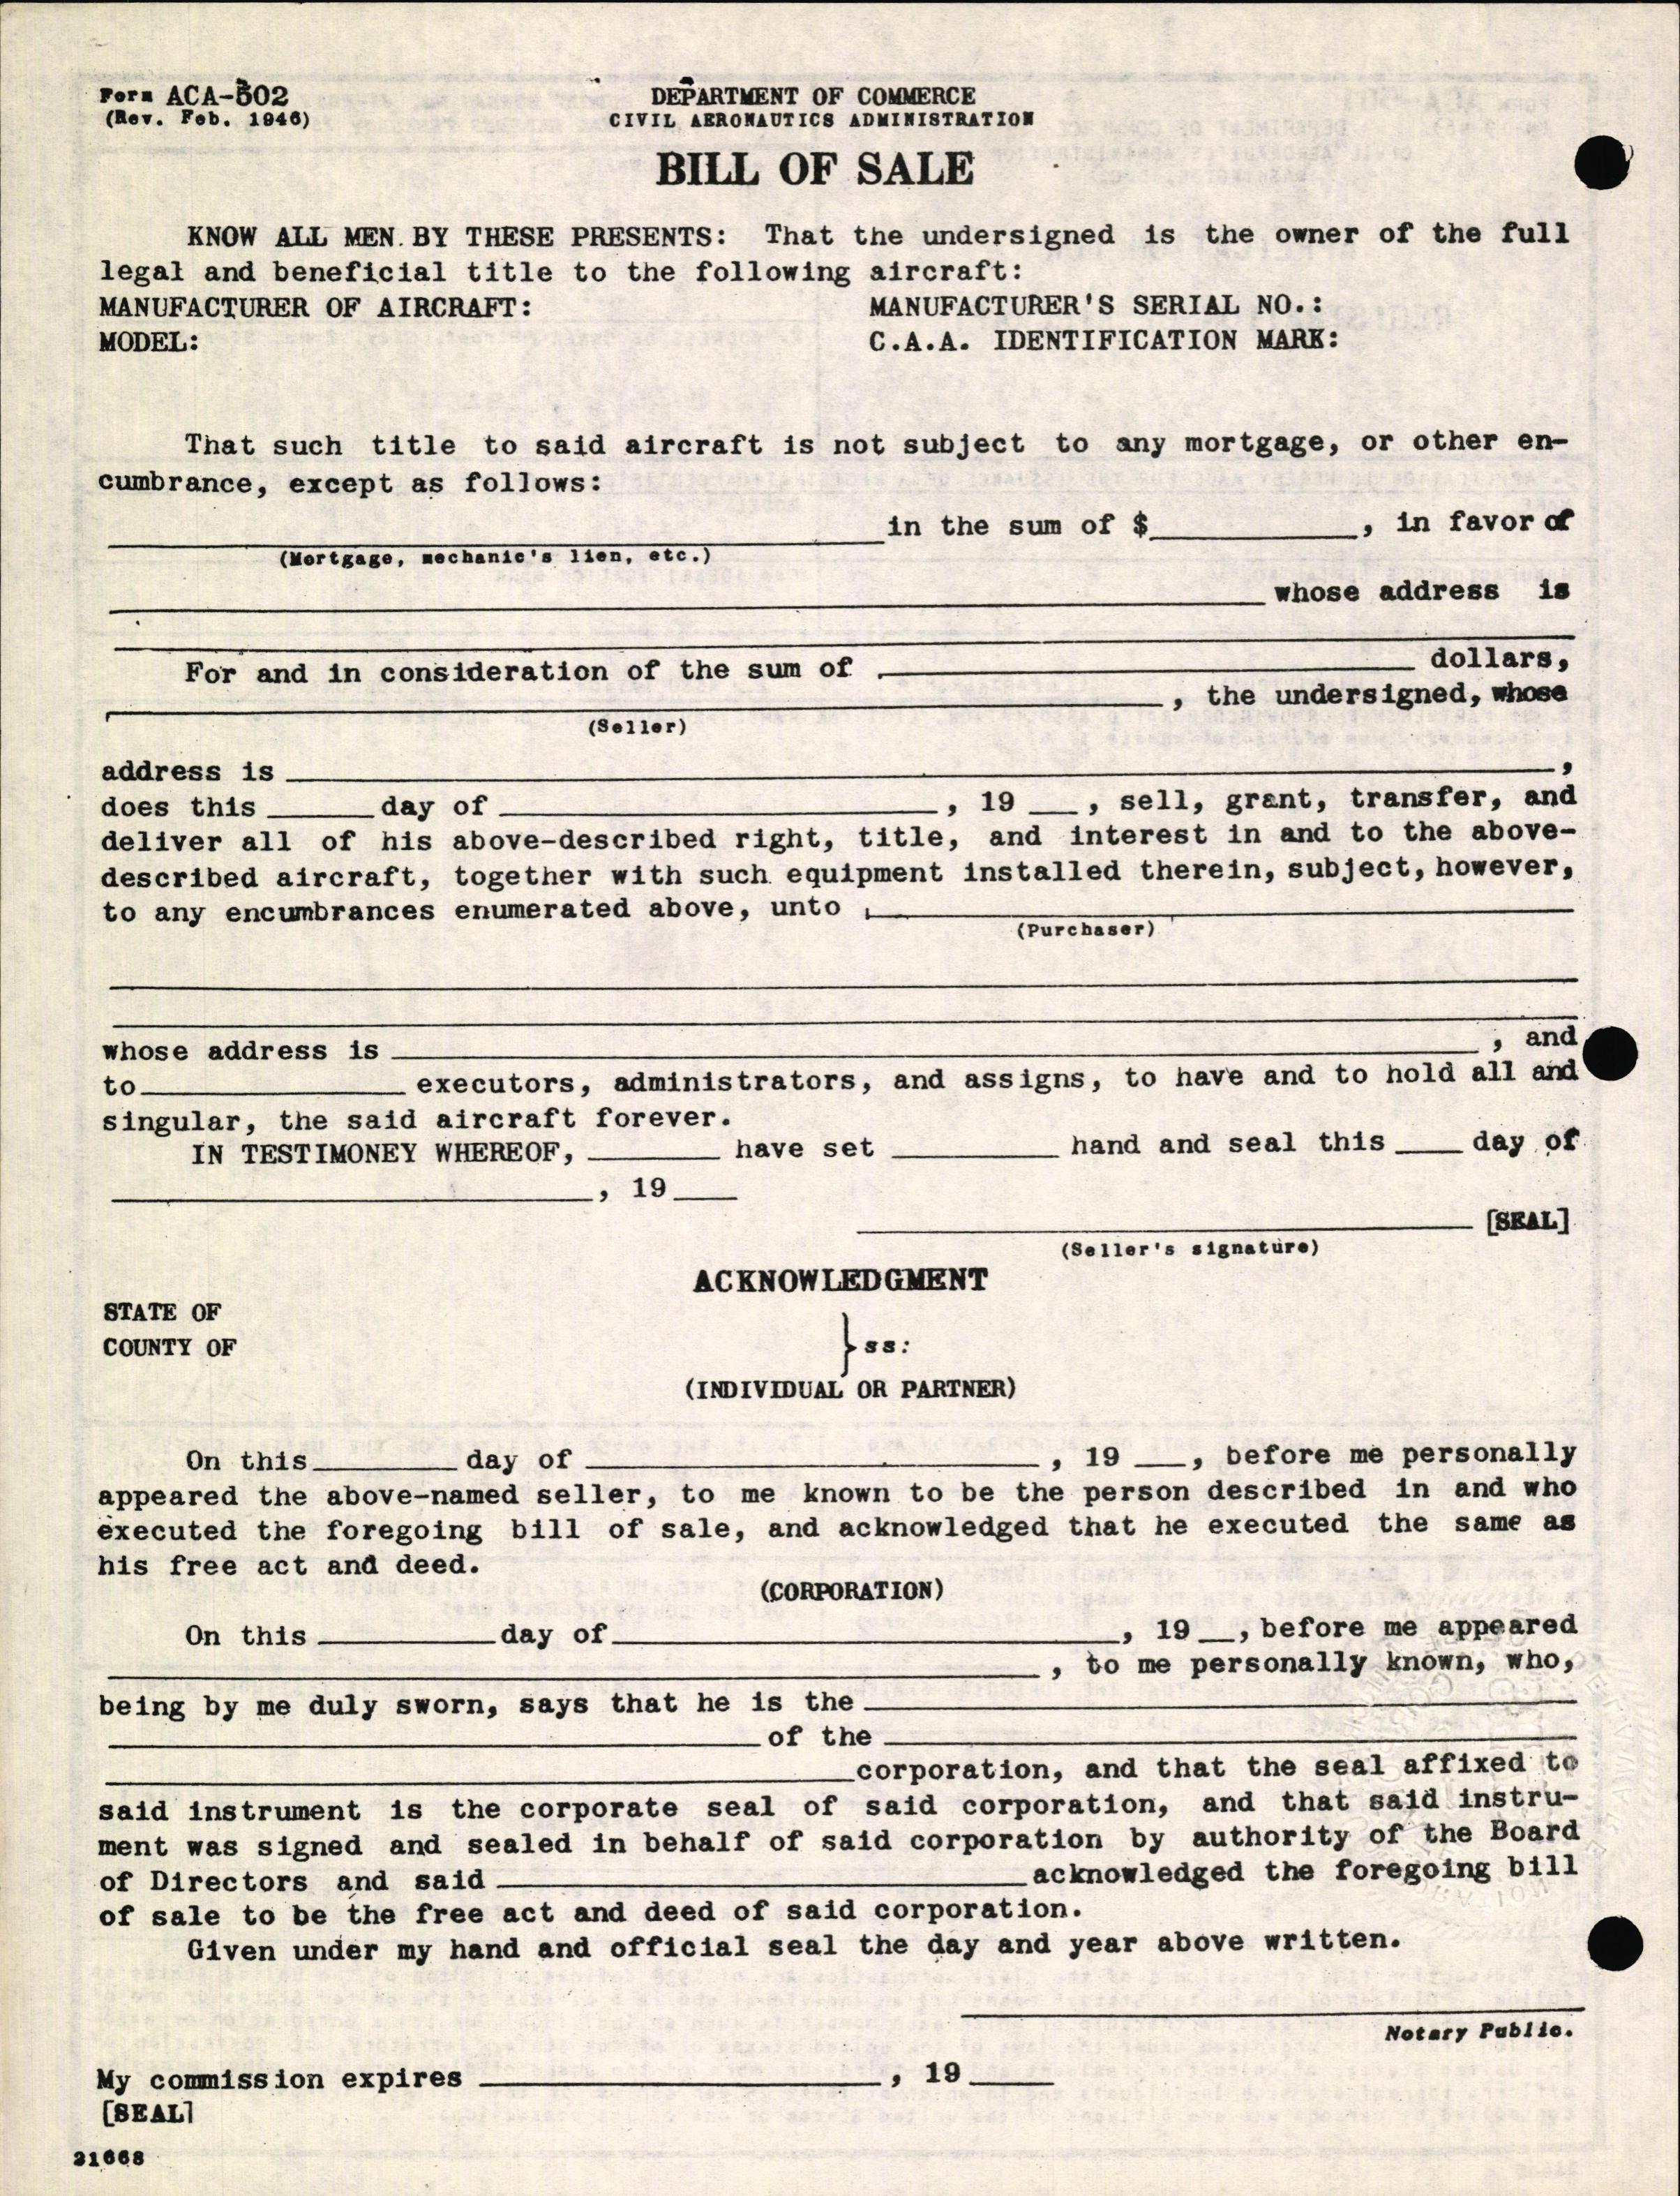 Sample page 4 from AirCorps Library document: Technical Information for Serial Number 2229